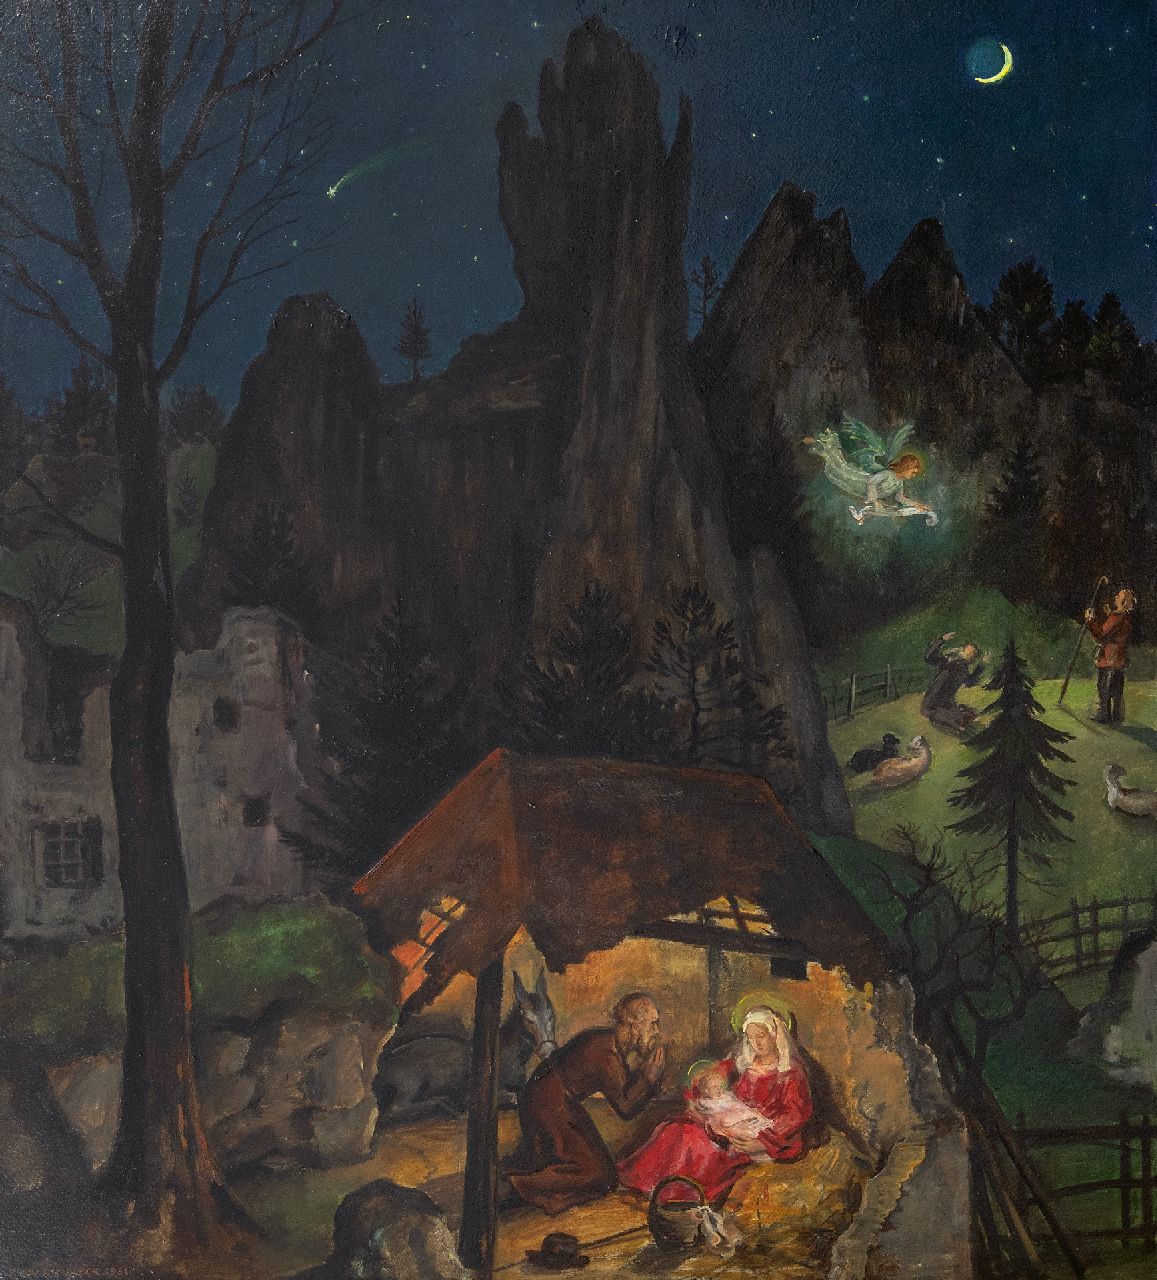 Rimböck M.  | Max Rimböck | Paintings offered for sale | The birth of Christ, oil on painter's board 73.5 x 66.0 cm, signed l.l. and dated 1931